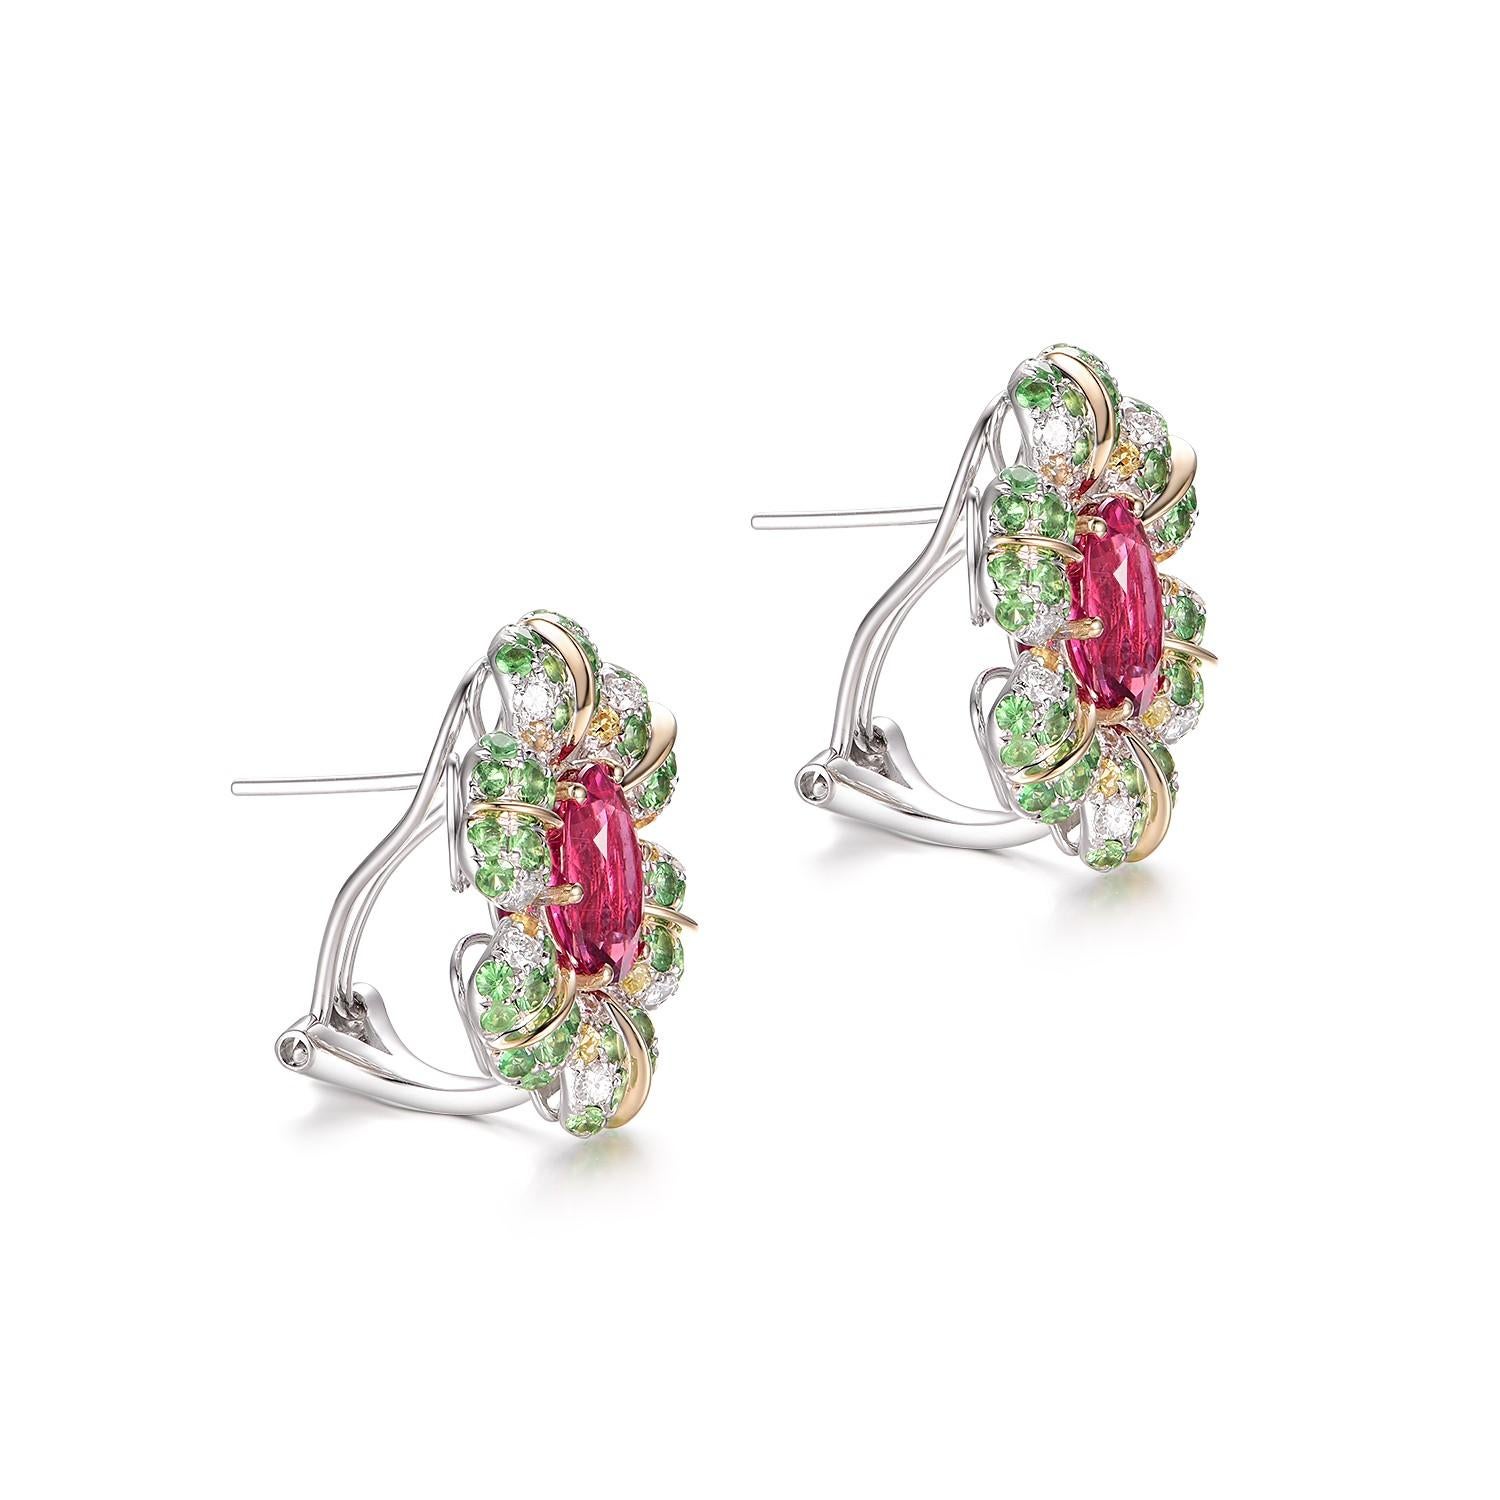 The earrings you've presented exhibit a magnificent 
Set in 14K Yellow Gold, these earrings are adorned with a central Rubellite, known for its striking and vivid reddish-pink hue. Weighing 3.45 carats, the Rubellites are the stars of this piece.